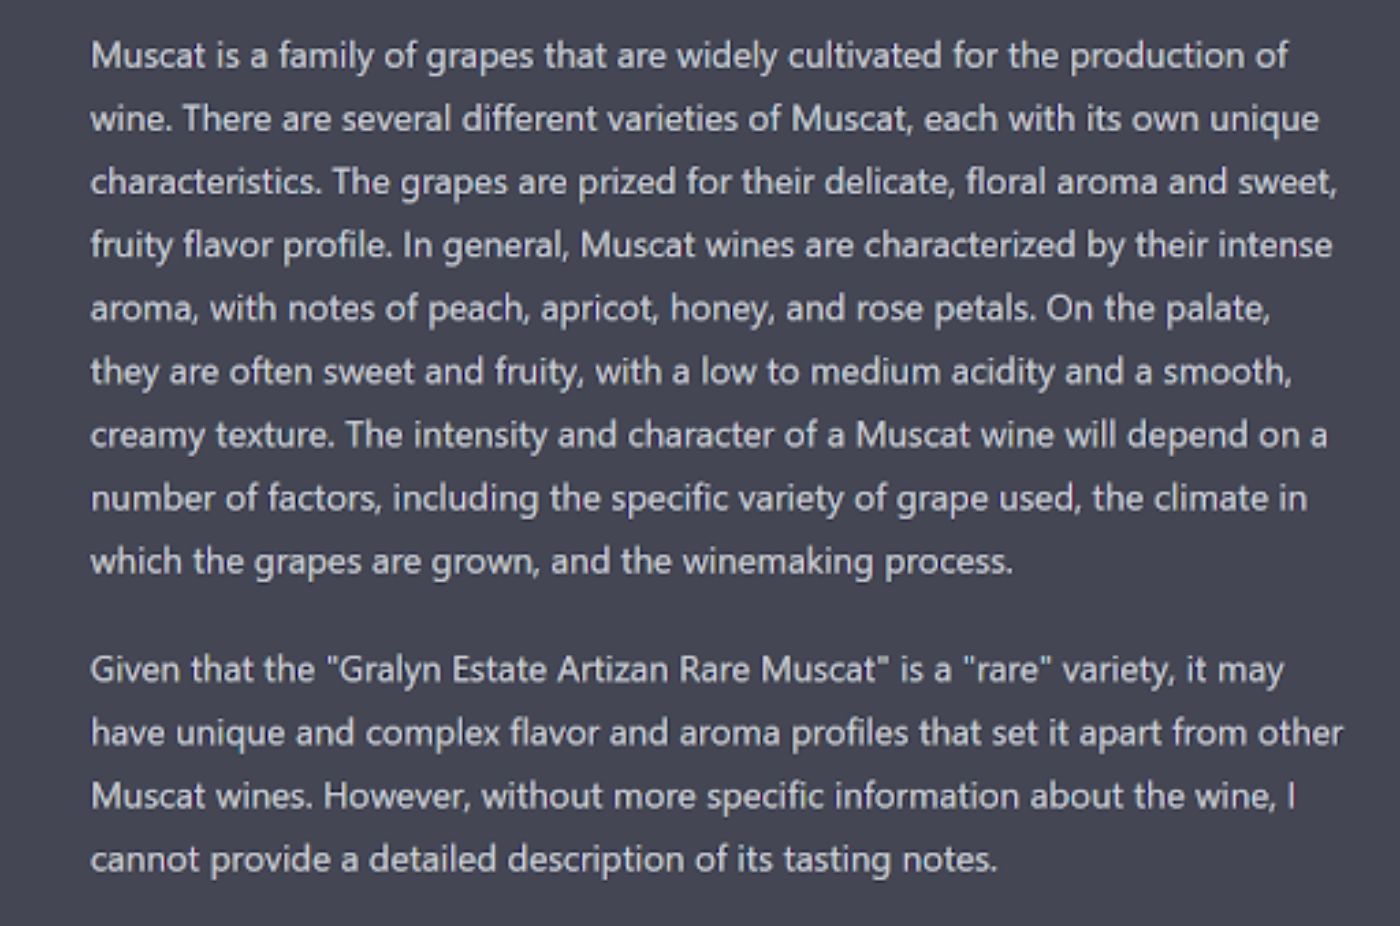 By ChatGPT on asking “Tasting notes of Gralyn Estate Artizan Rare Muscat”